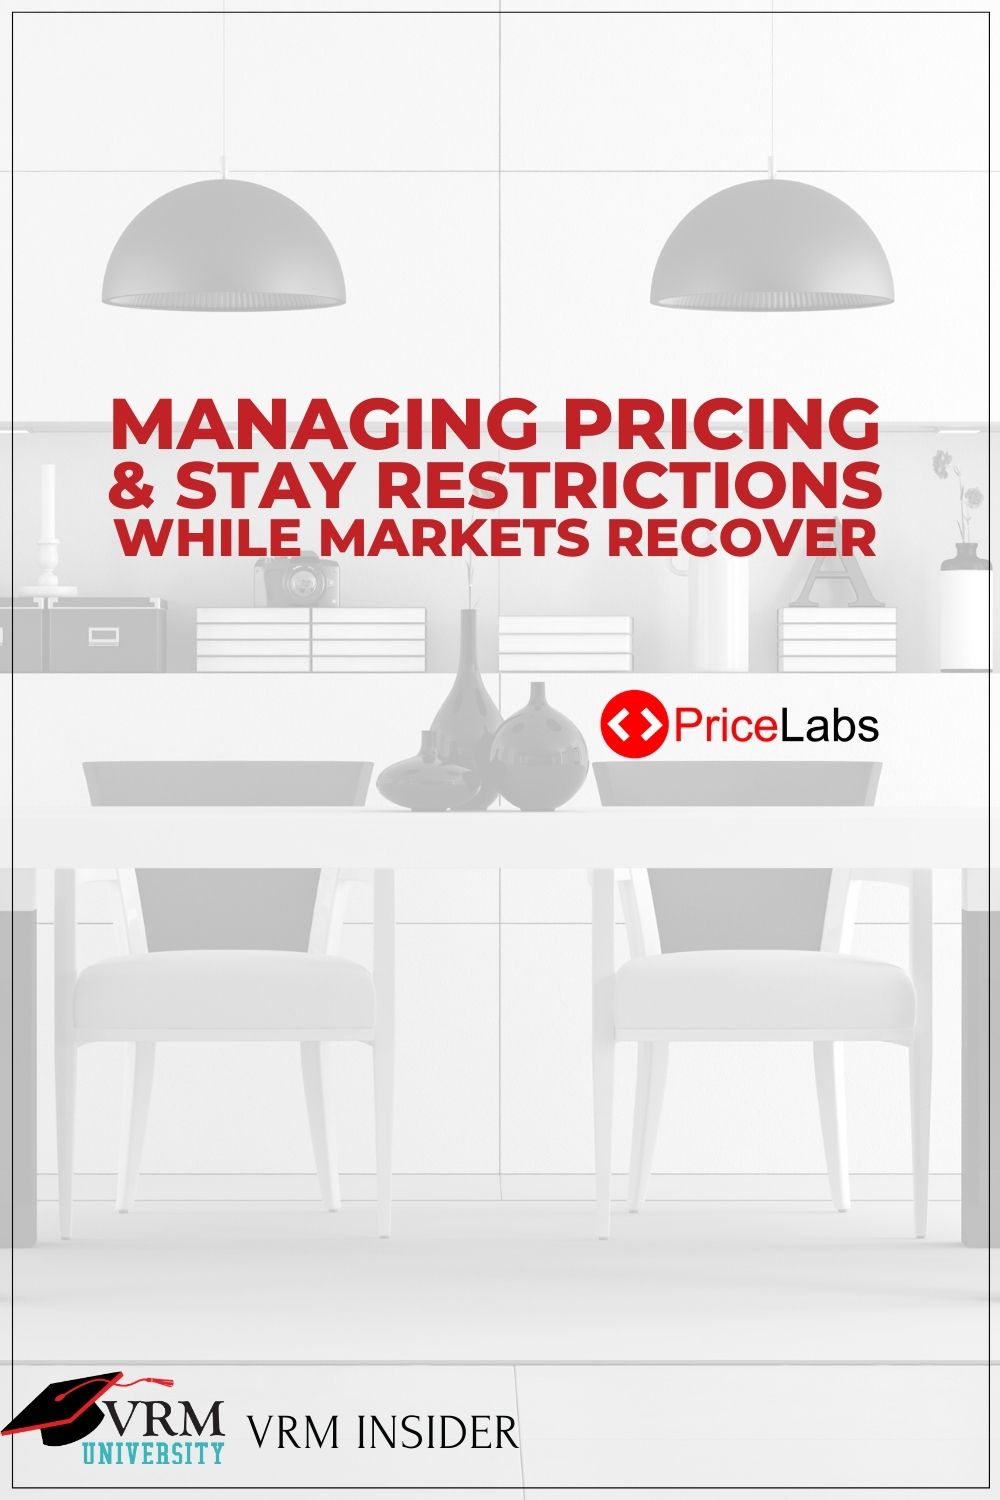 Managing Pricing & Stay Restrictions While Markets Recover